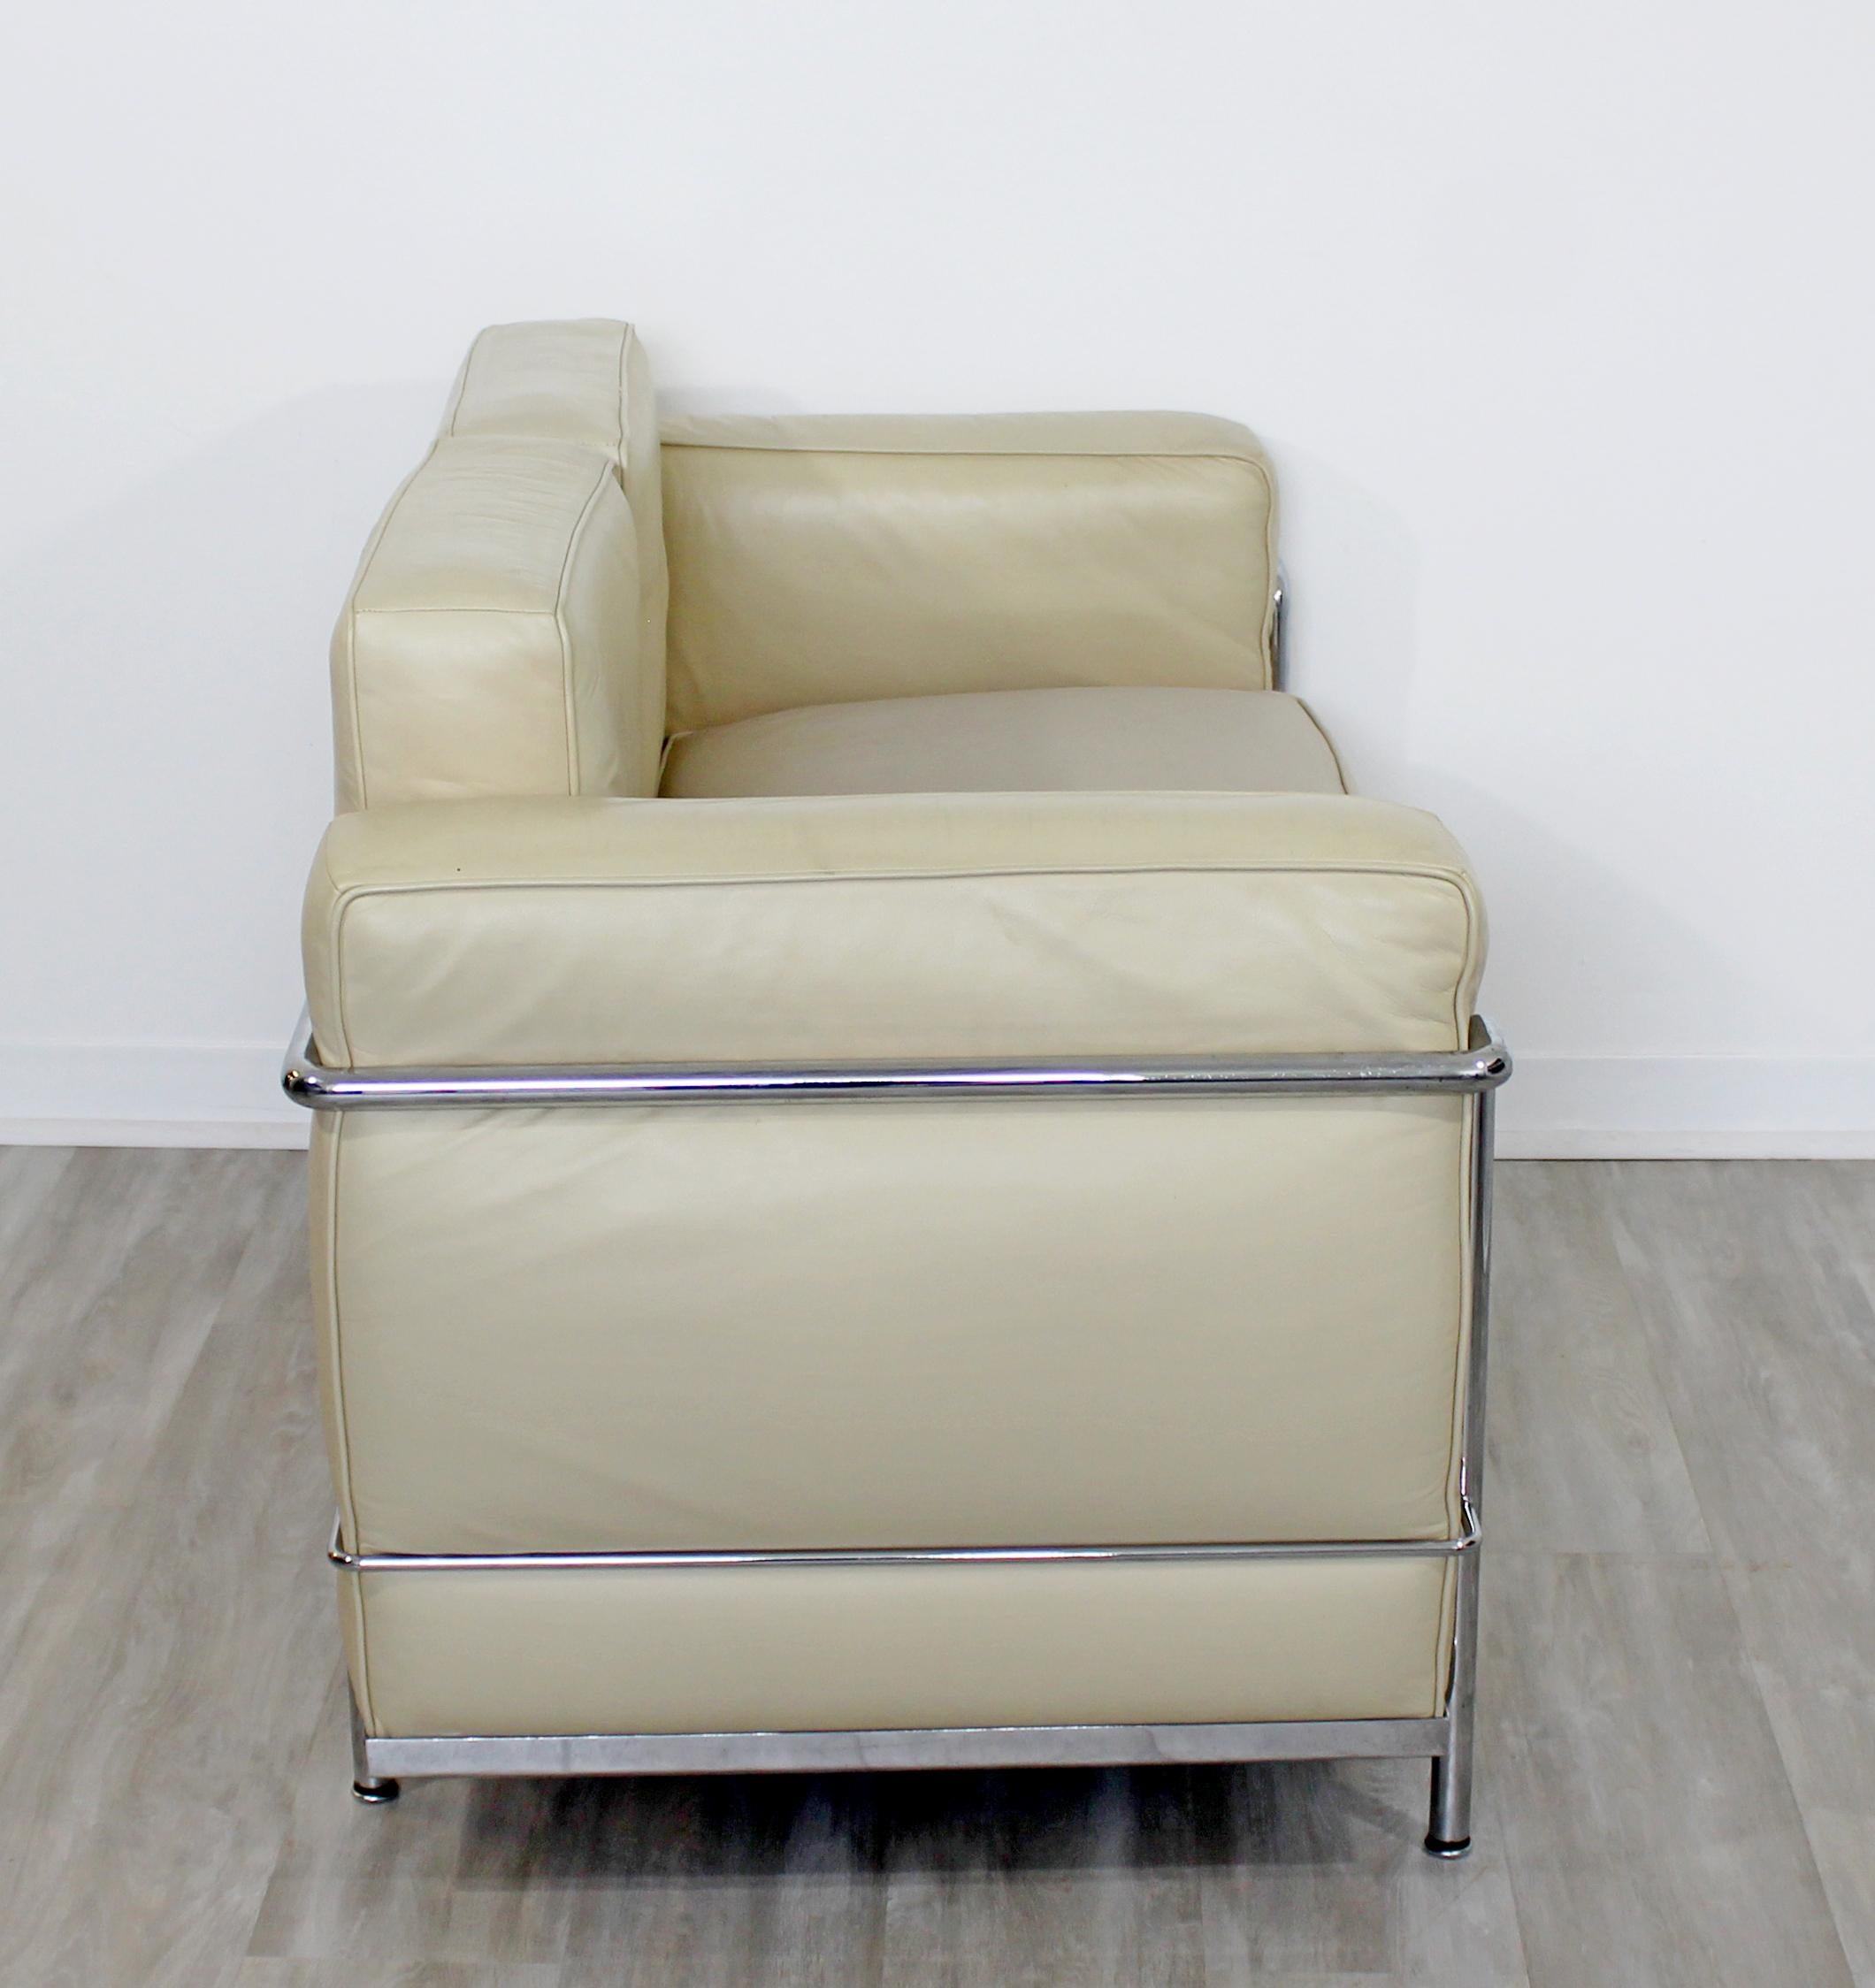 Modern Contemporary Le Corbusier Cream Leather and Chrome Loveseat Sofa Italy 2